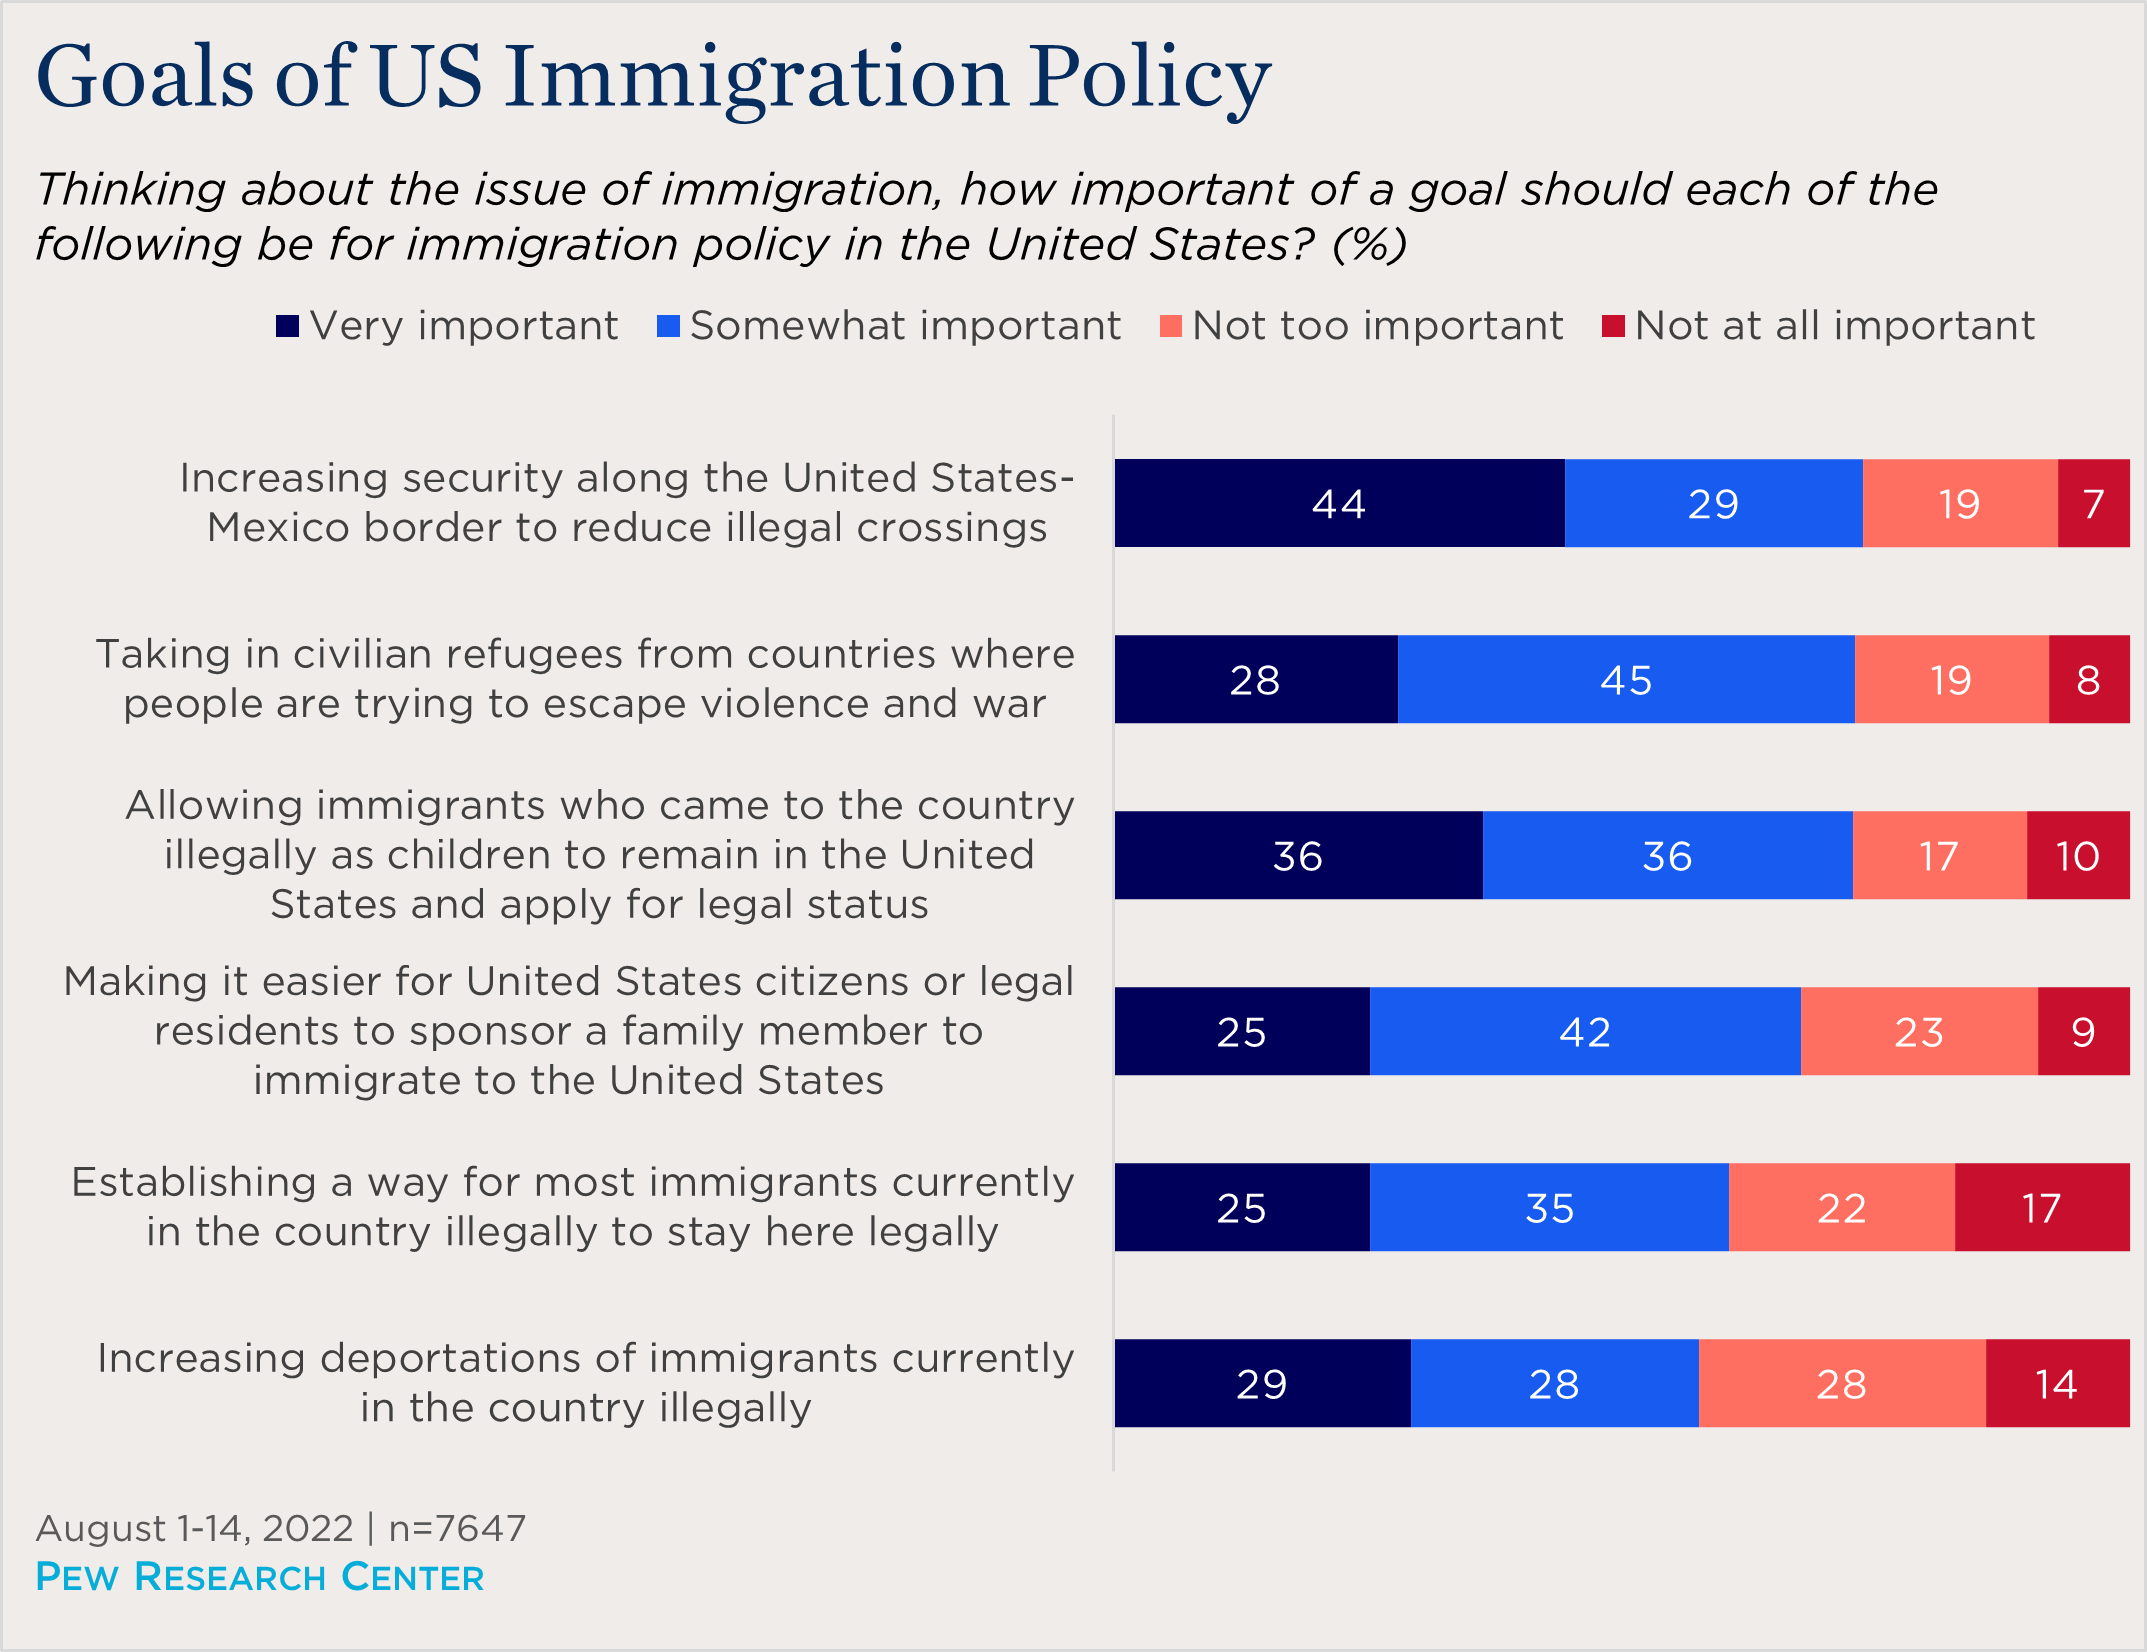 "bar chart showing views of the goals of US immigration policy"